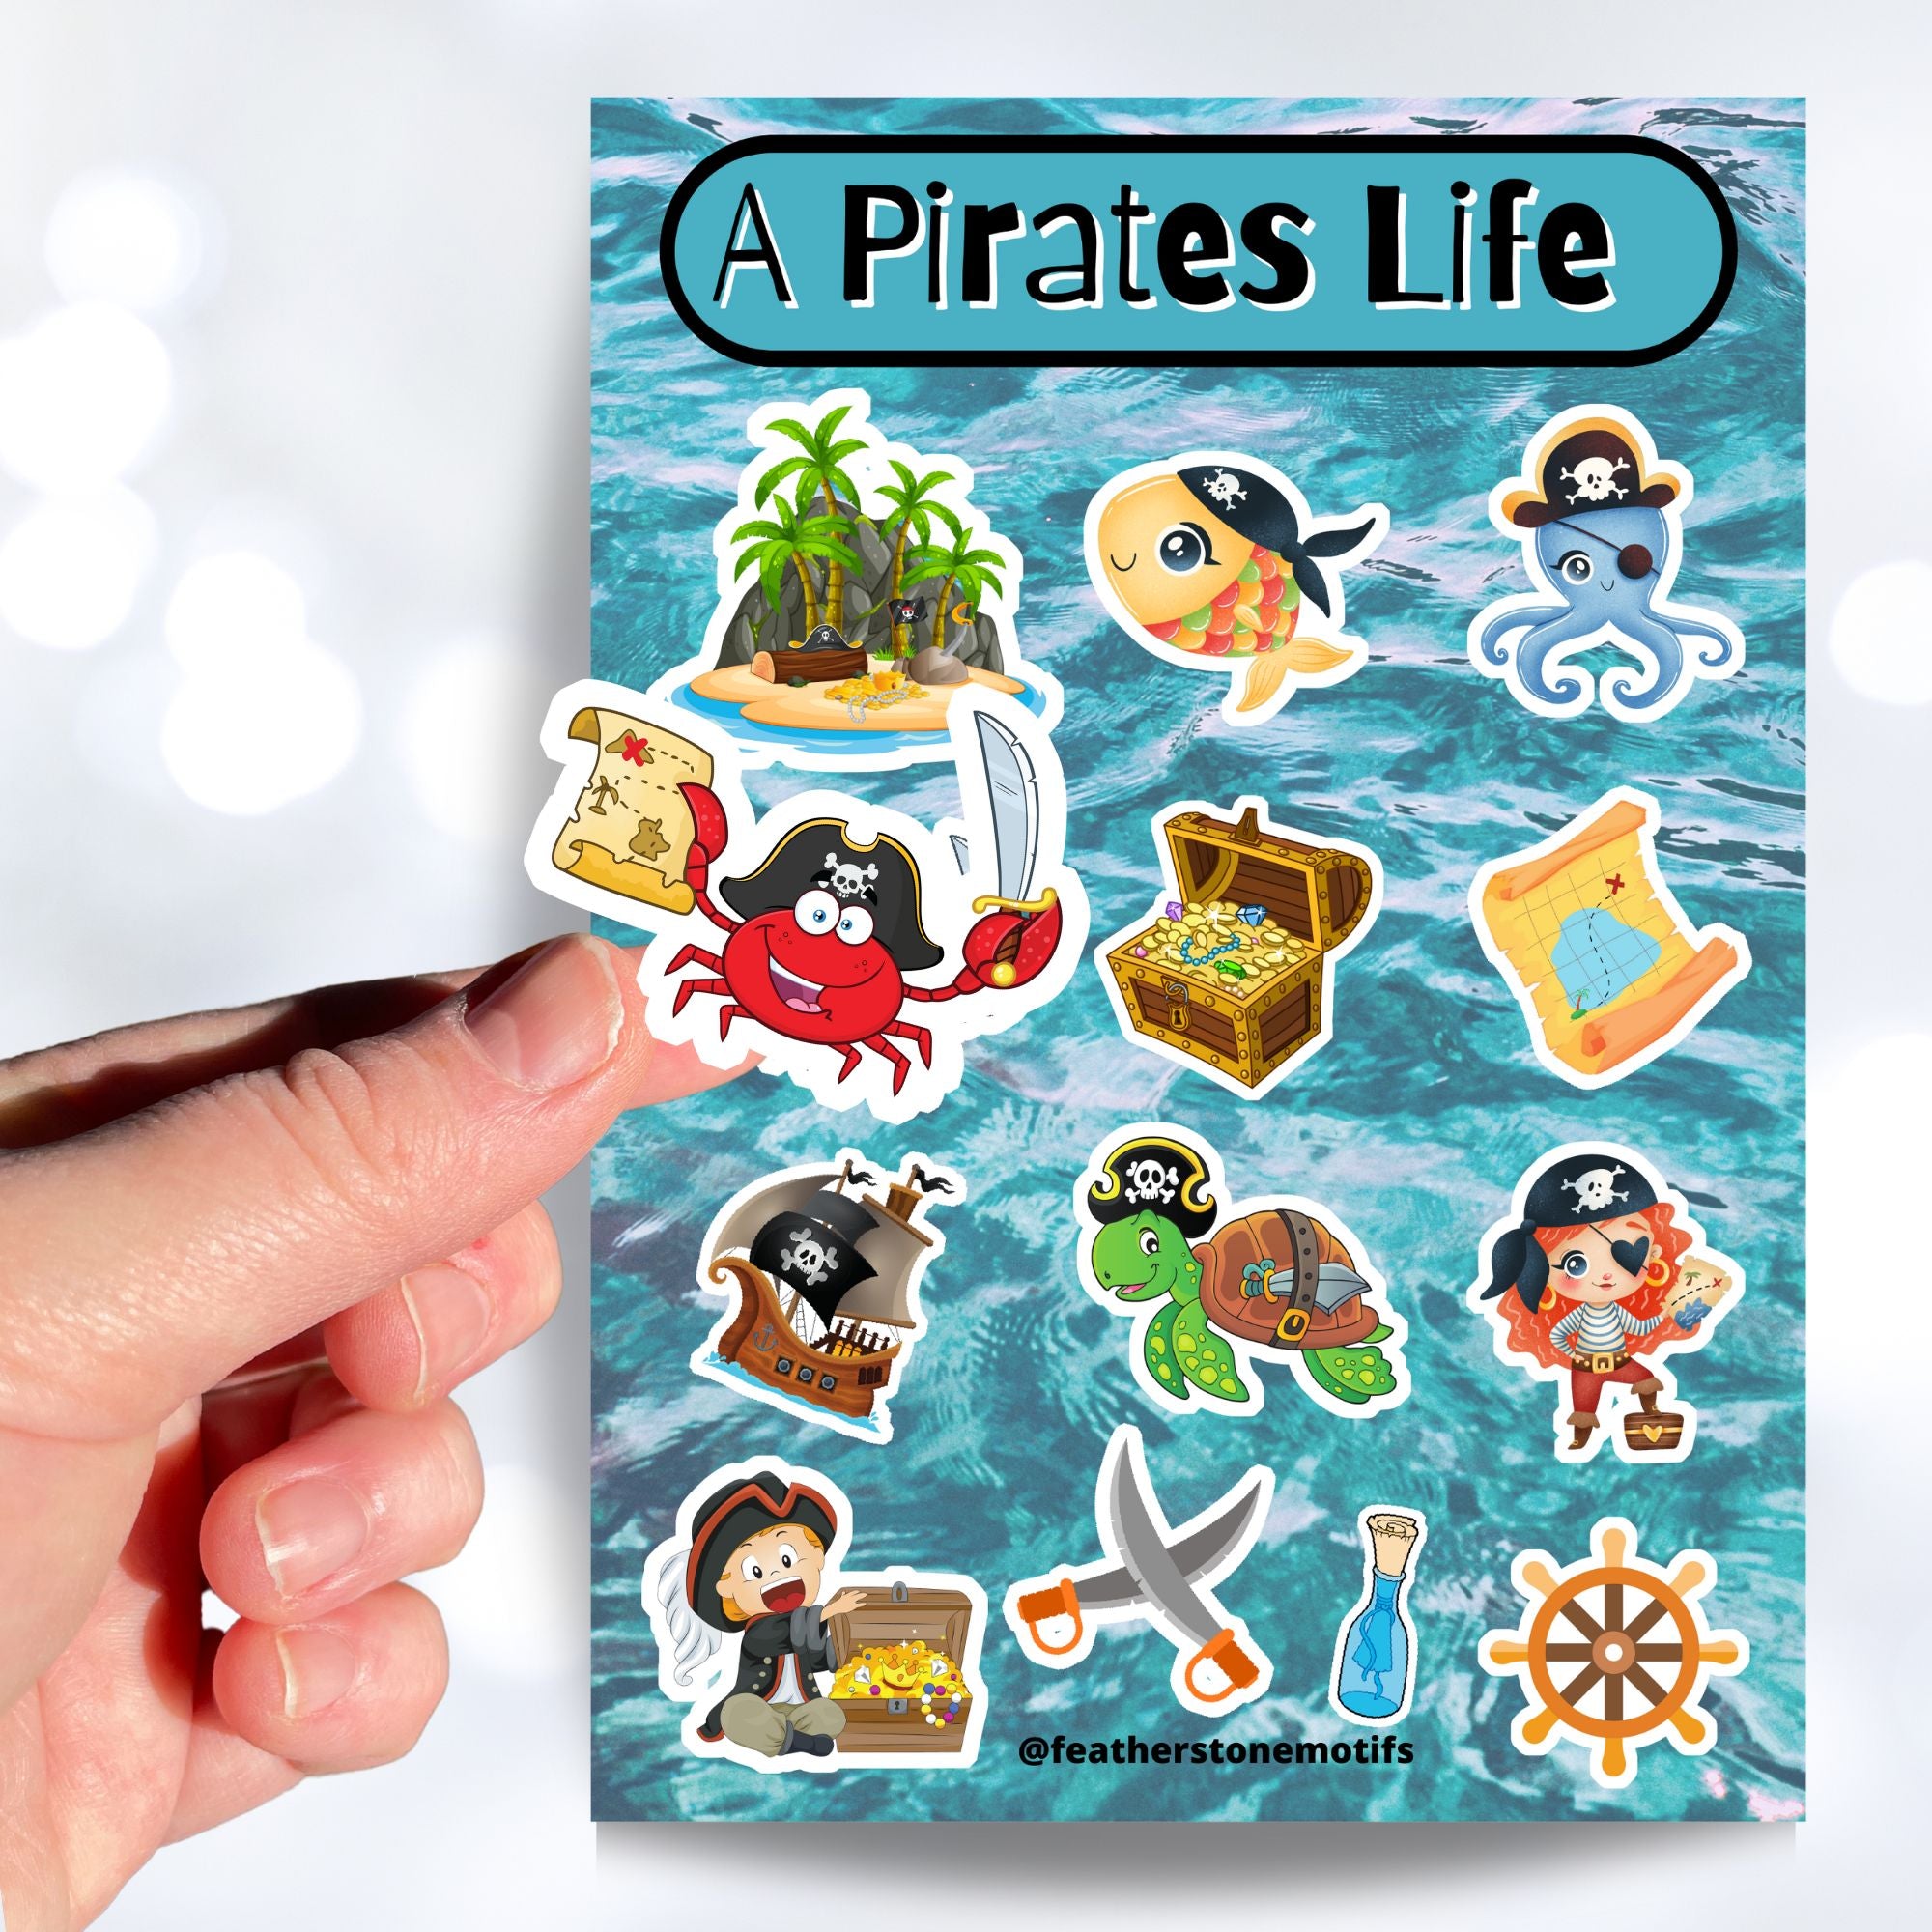 You'll walk the plank to get our A Pirates Life sticker sheet with individual stickers of treasure chests, treasure maps, pirate ships, pirates, and pirate creatures.  This is an image of a hand holding one of the stickers above the sticker sheet.